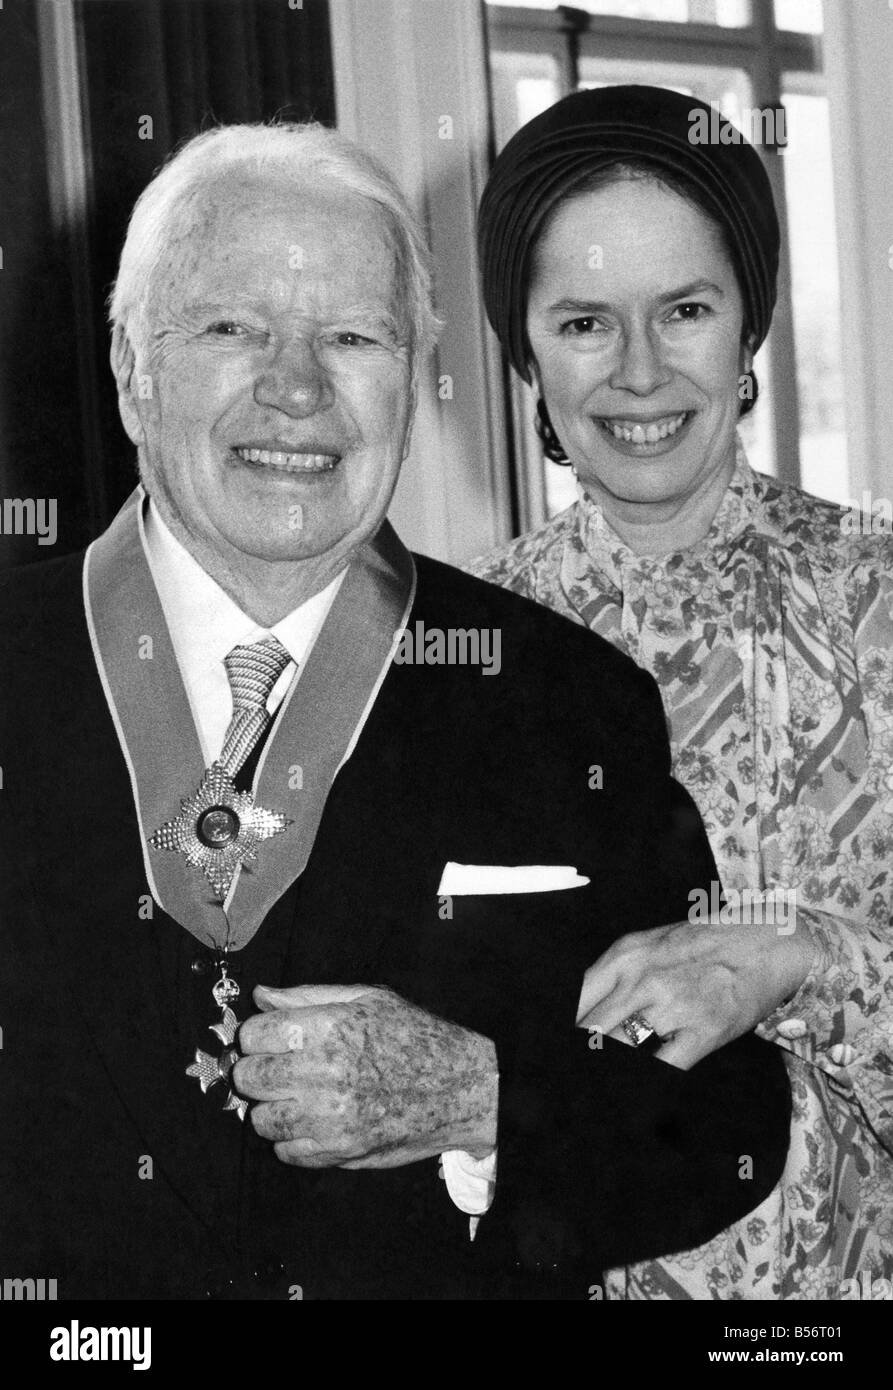 Sir Charles and Lady Cona Chaplin when he received his knighthood from the Queen. &#13;&#10;April 1975 &#13;&#10;P010038 Stock Photo